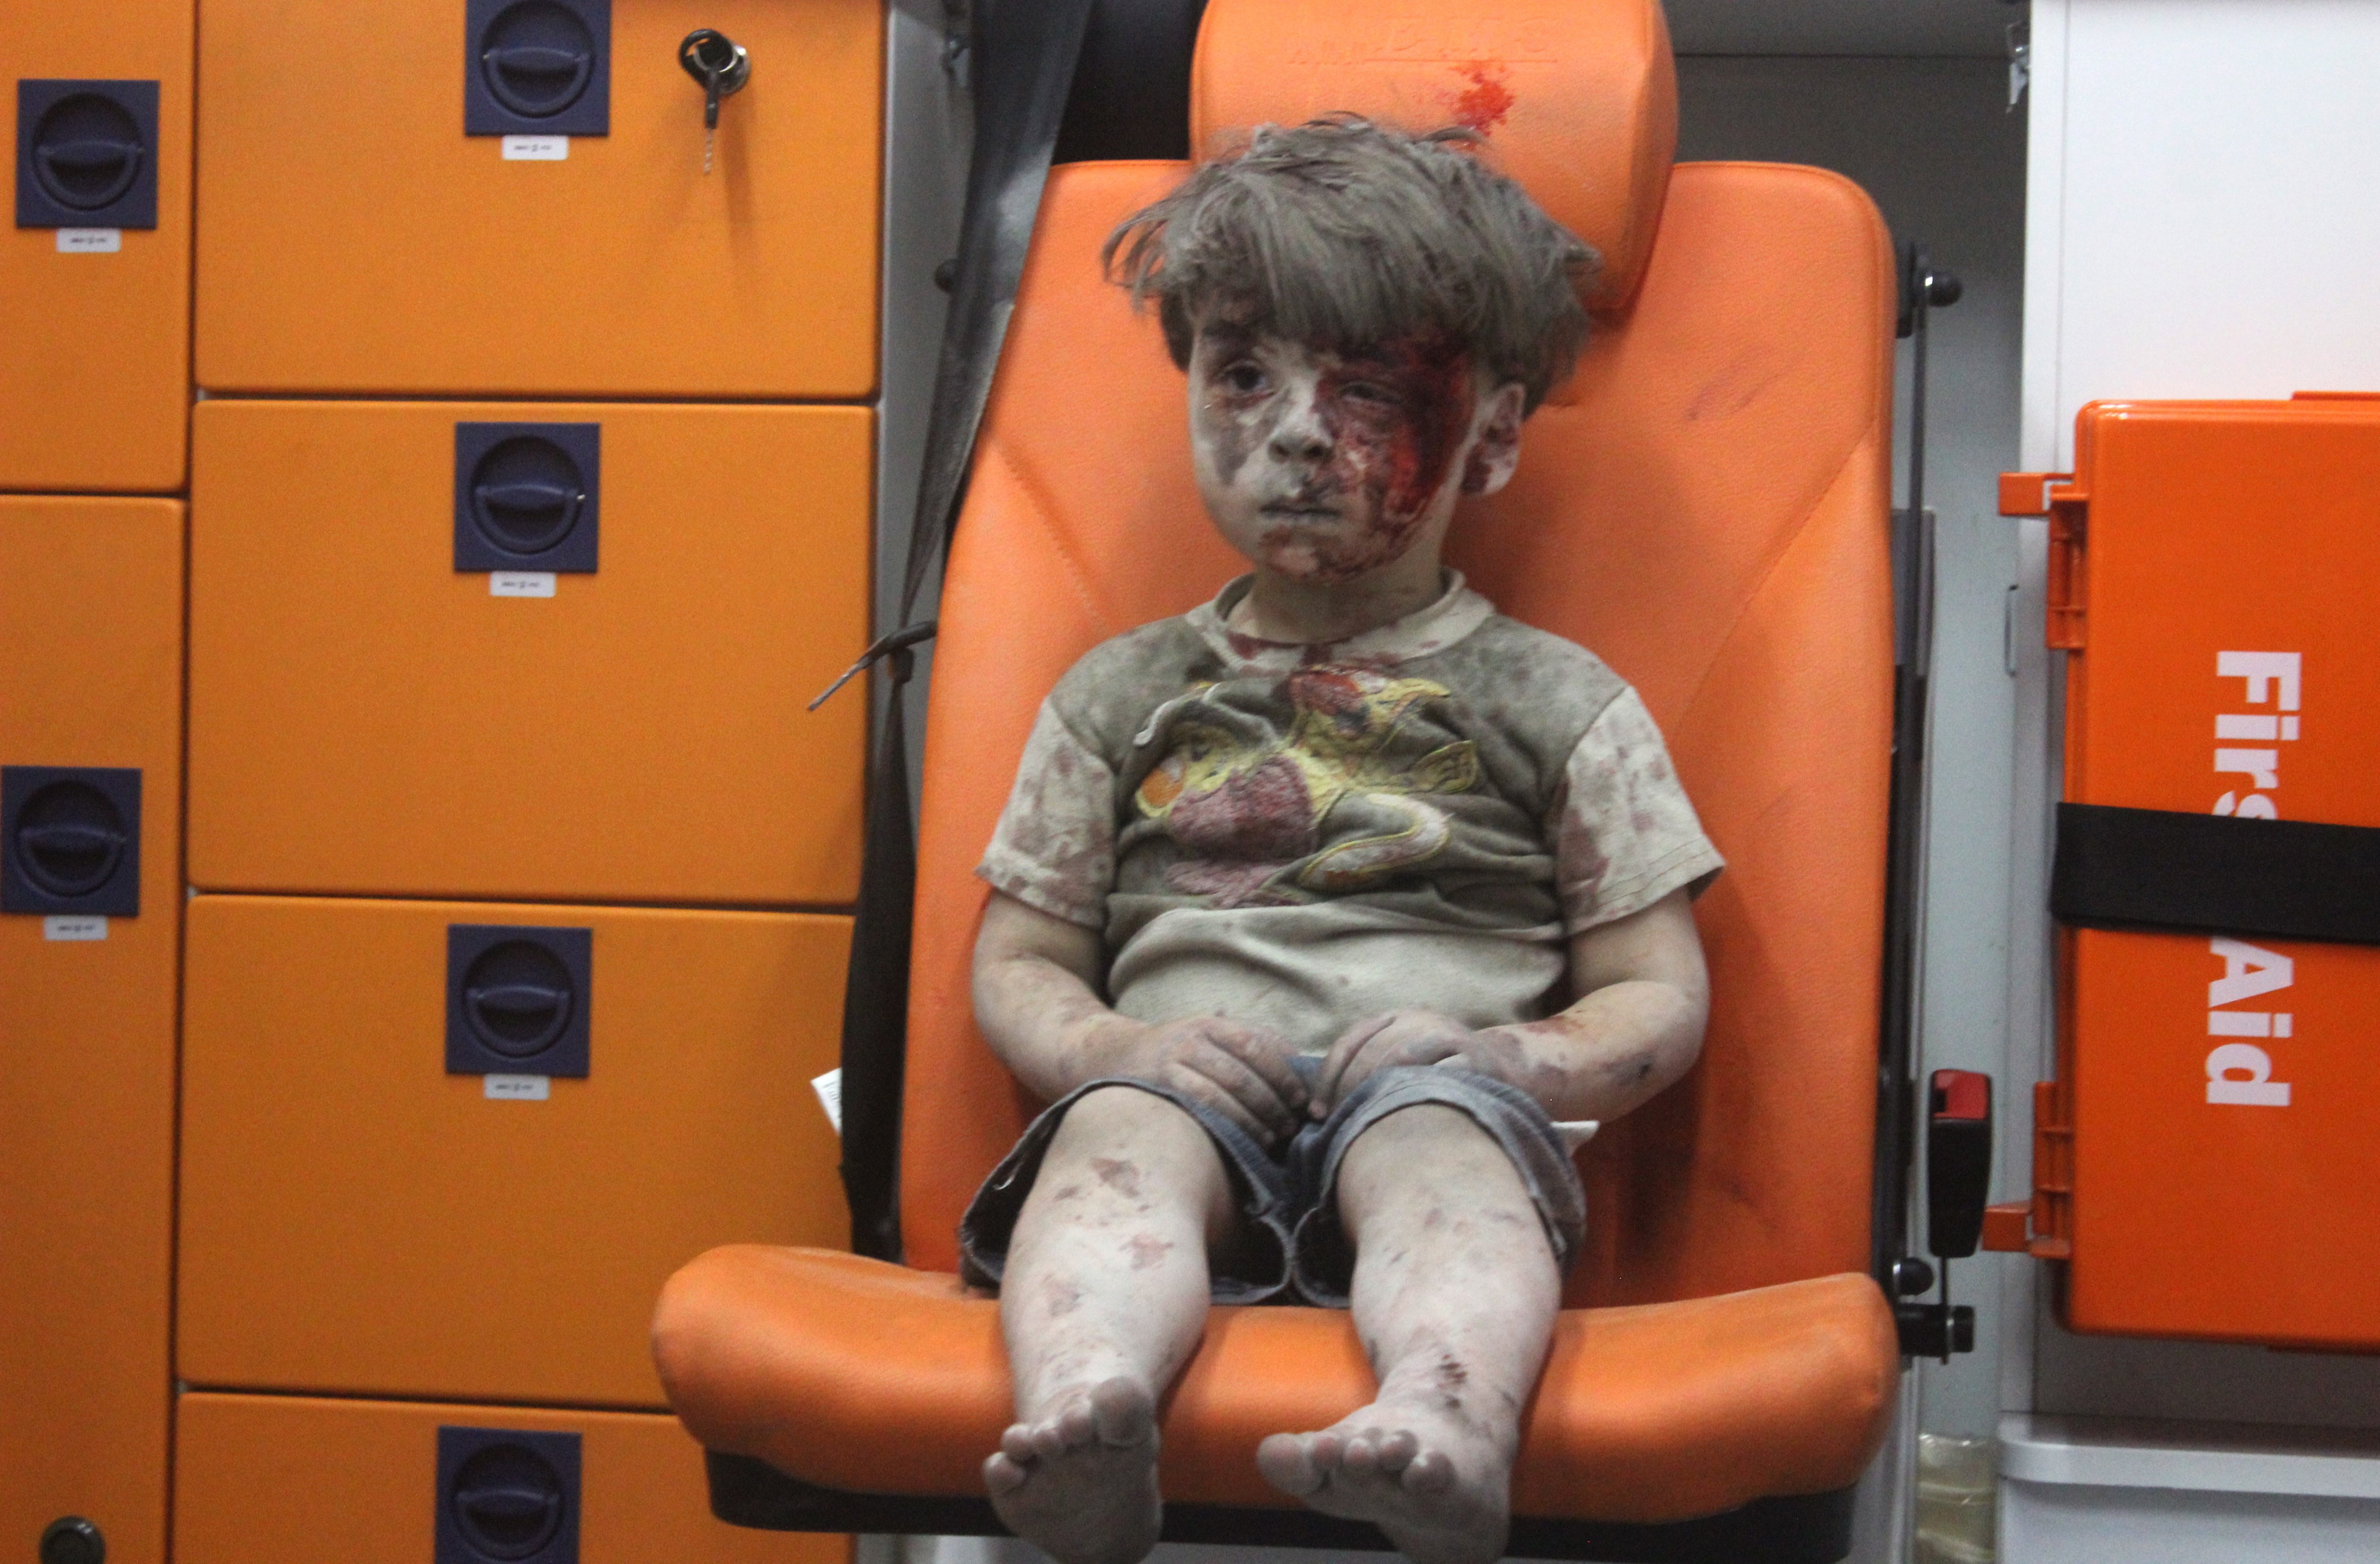 Five-year-old wounded Syrian boy Omran Daqneesh sits alone in the back of the ambulance after he sustained injuries during an airstrike targeting the Qaterji neighborhood of Aleppo on Aug. 17, 2016. (Mahmoud Rslan—Anadolu Agency/Getty Images)